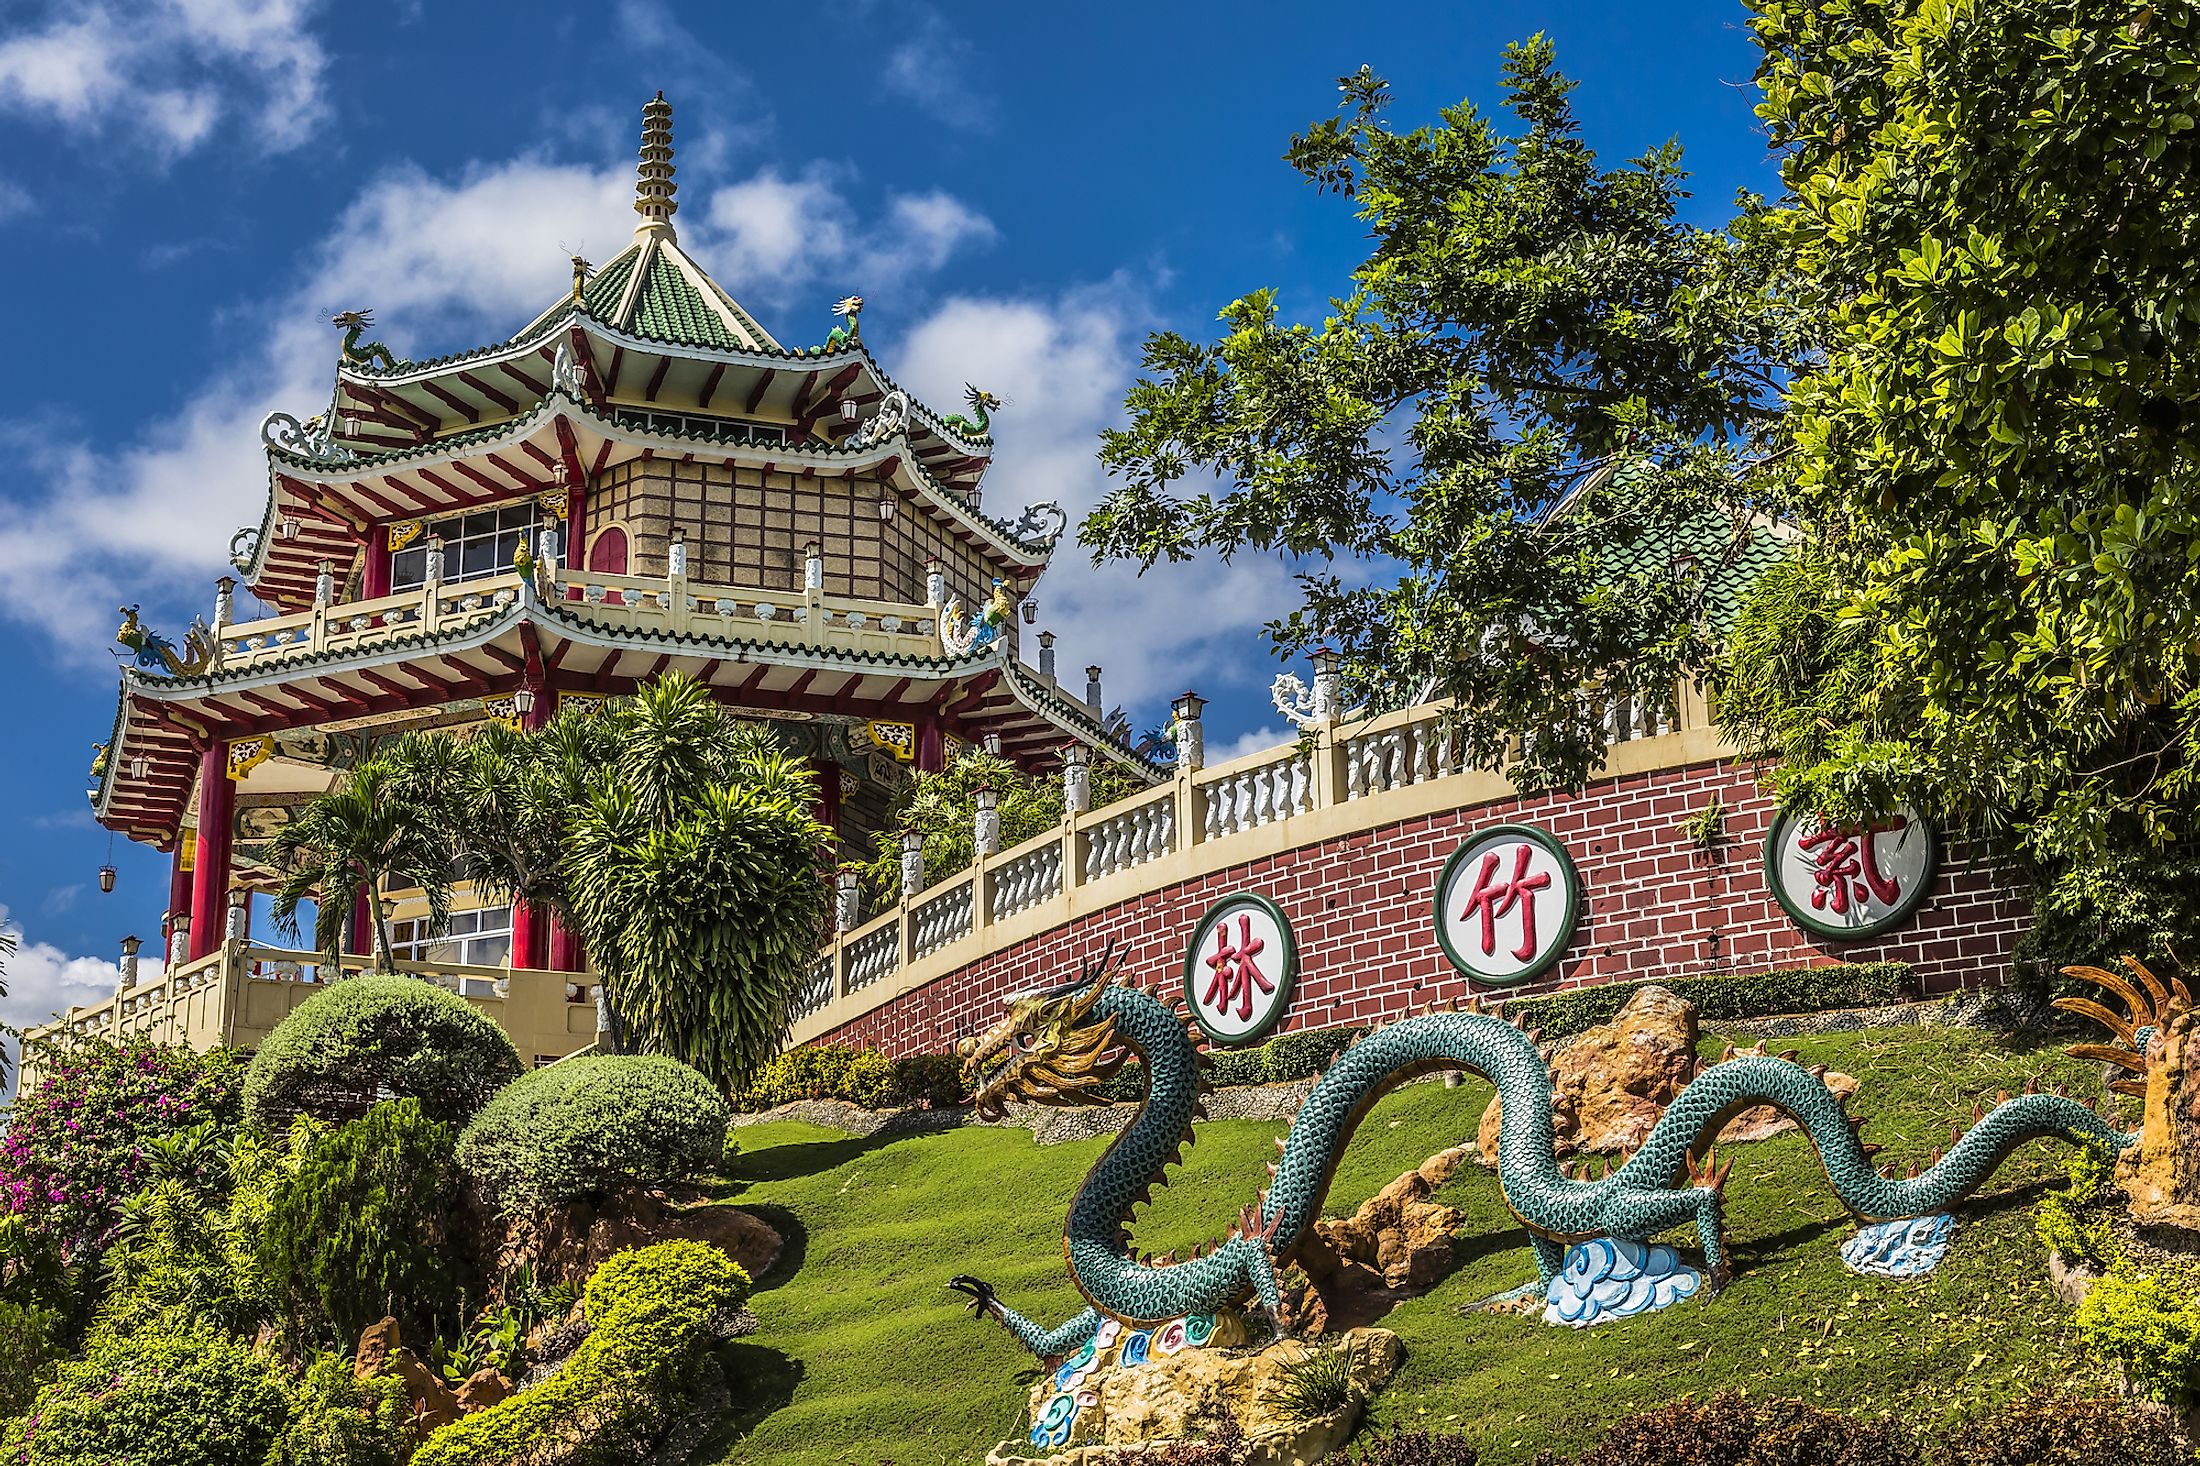 Pagoda and dragon sculpture of the Taoist Temple in Cebu, Philippines.